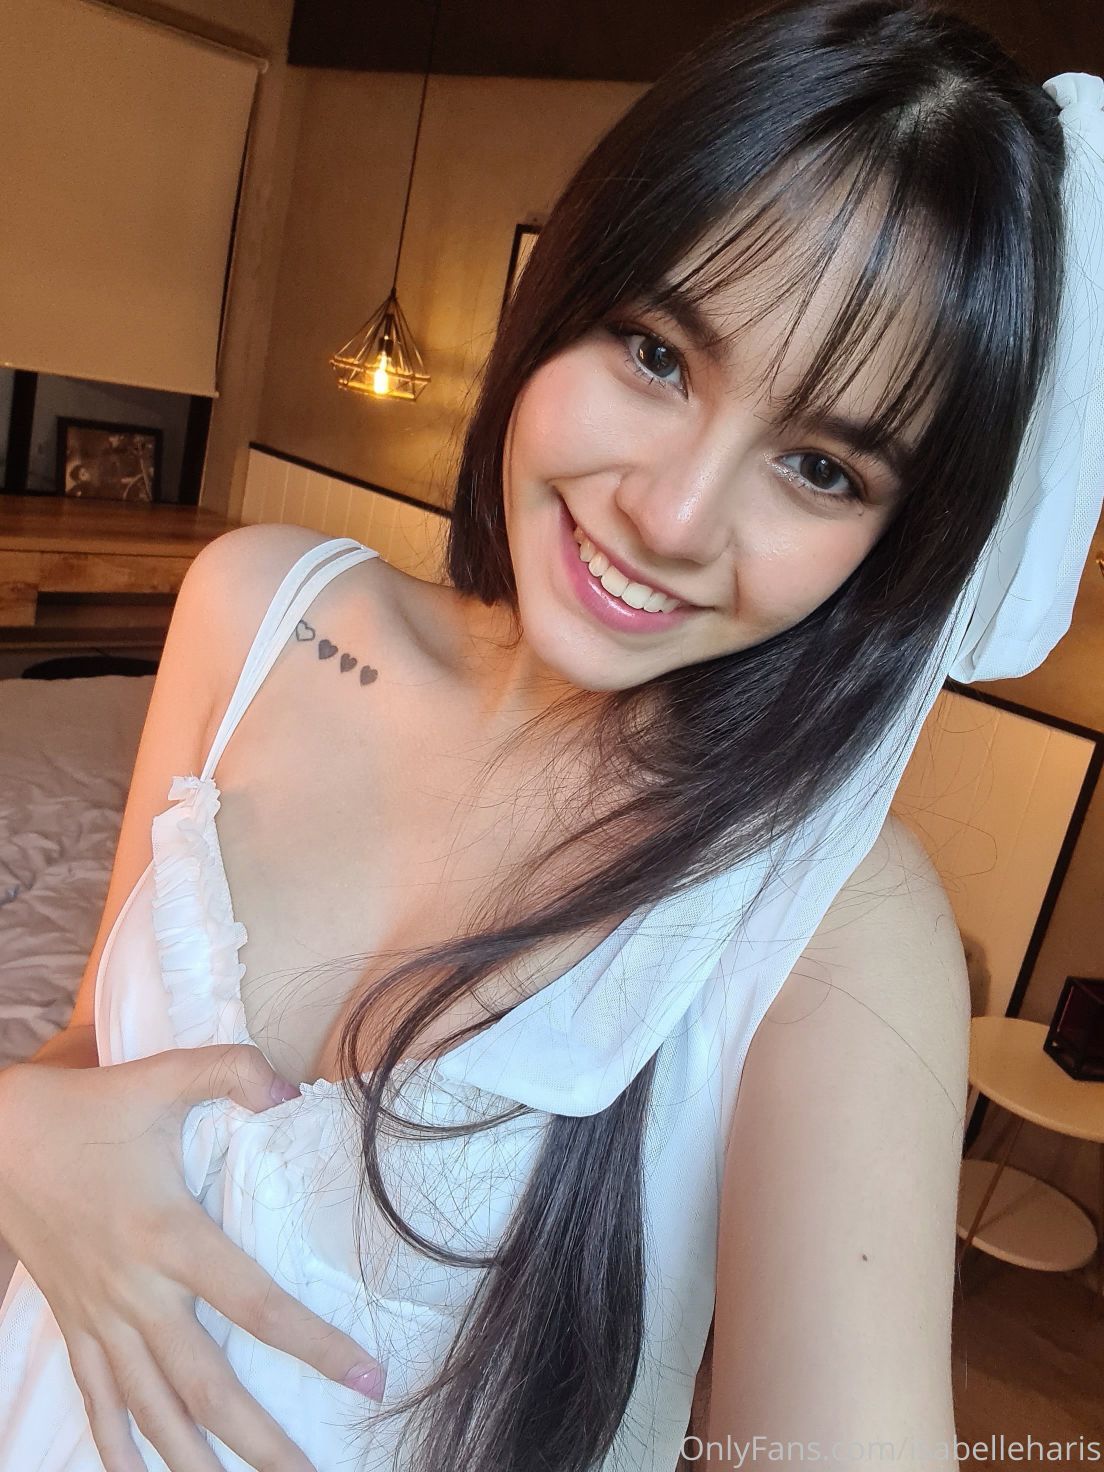 Asianonlyfans